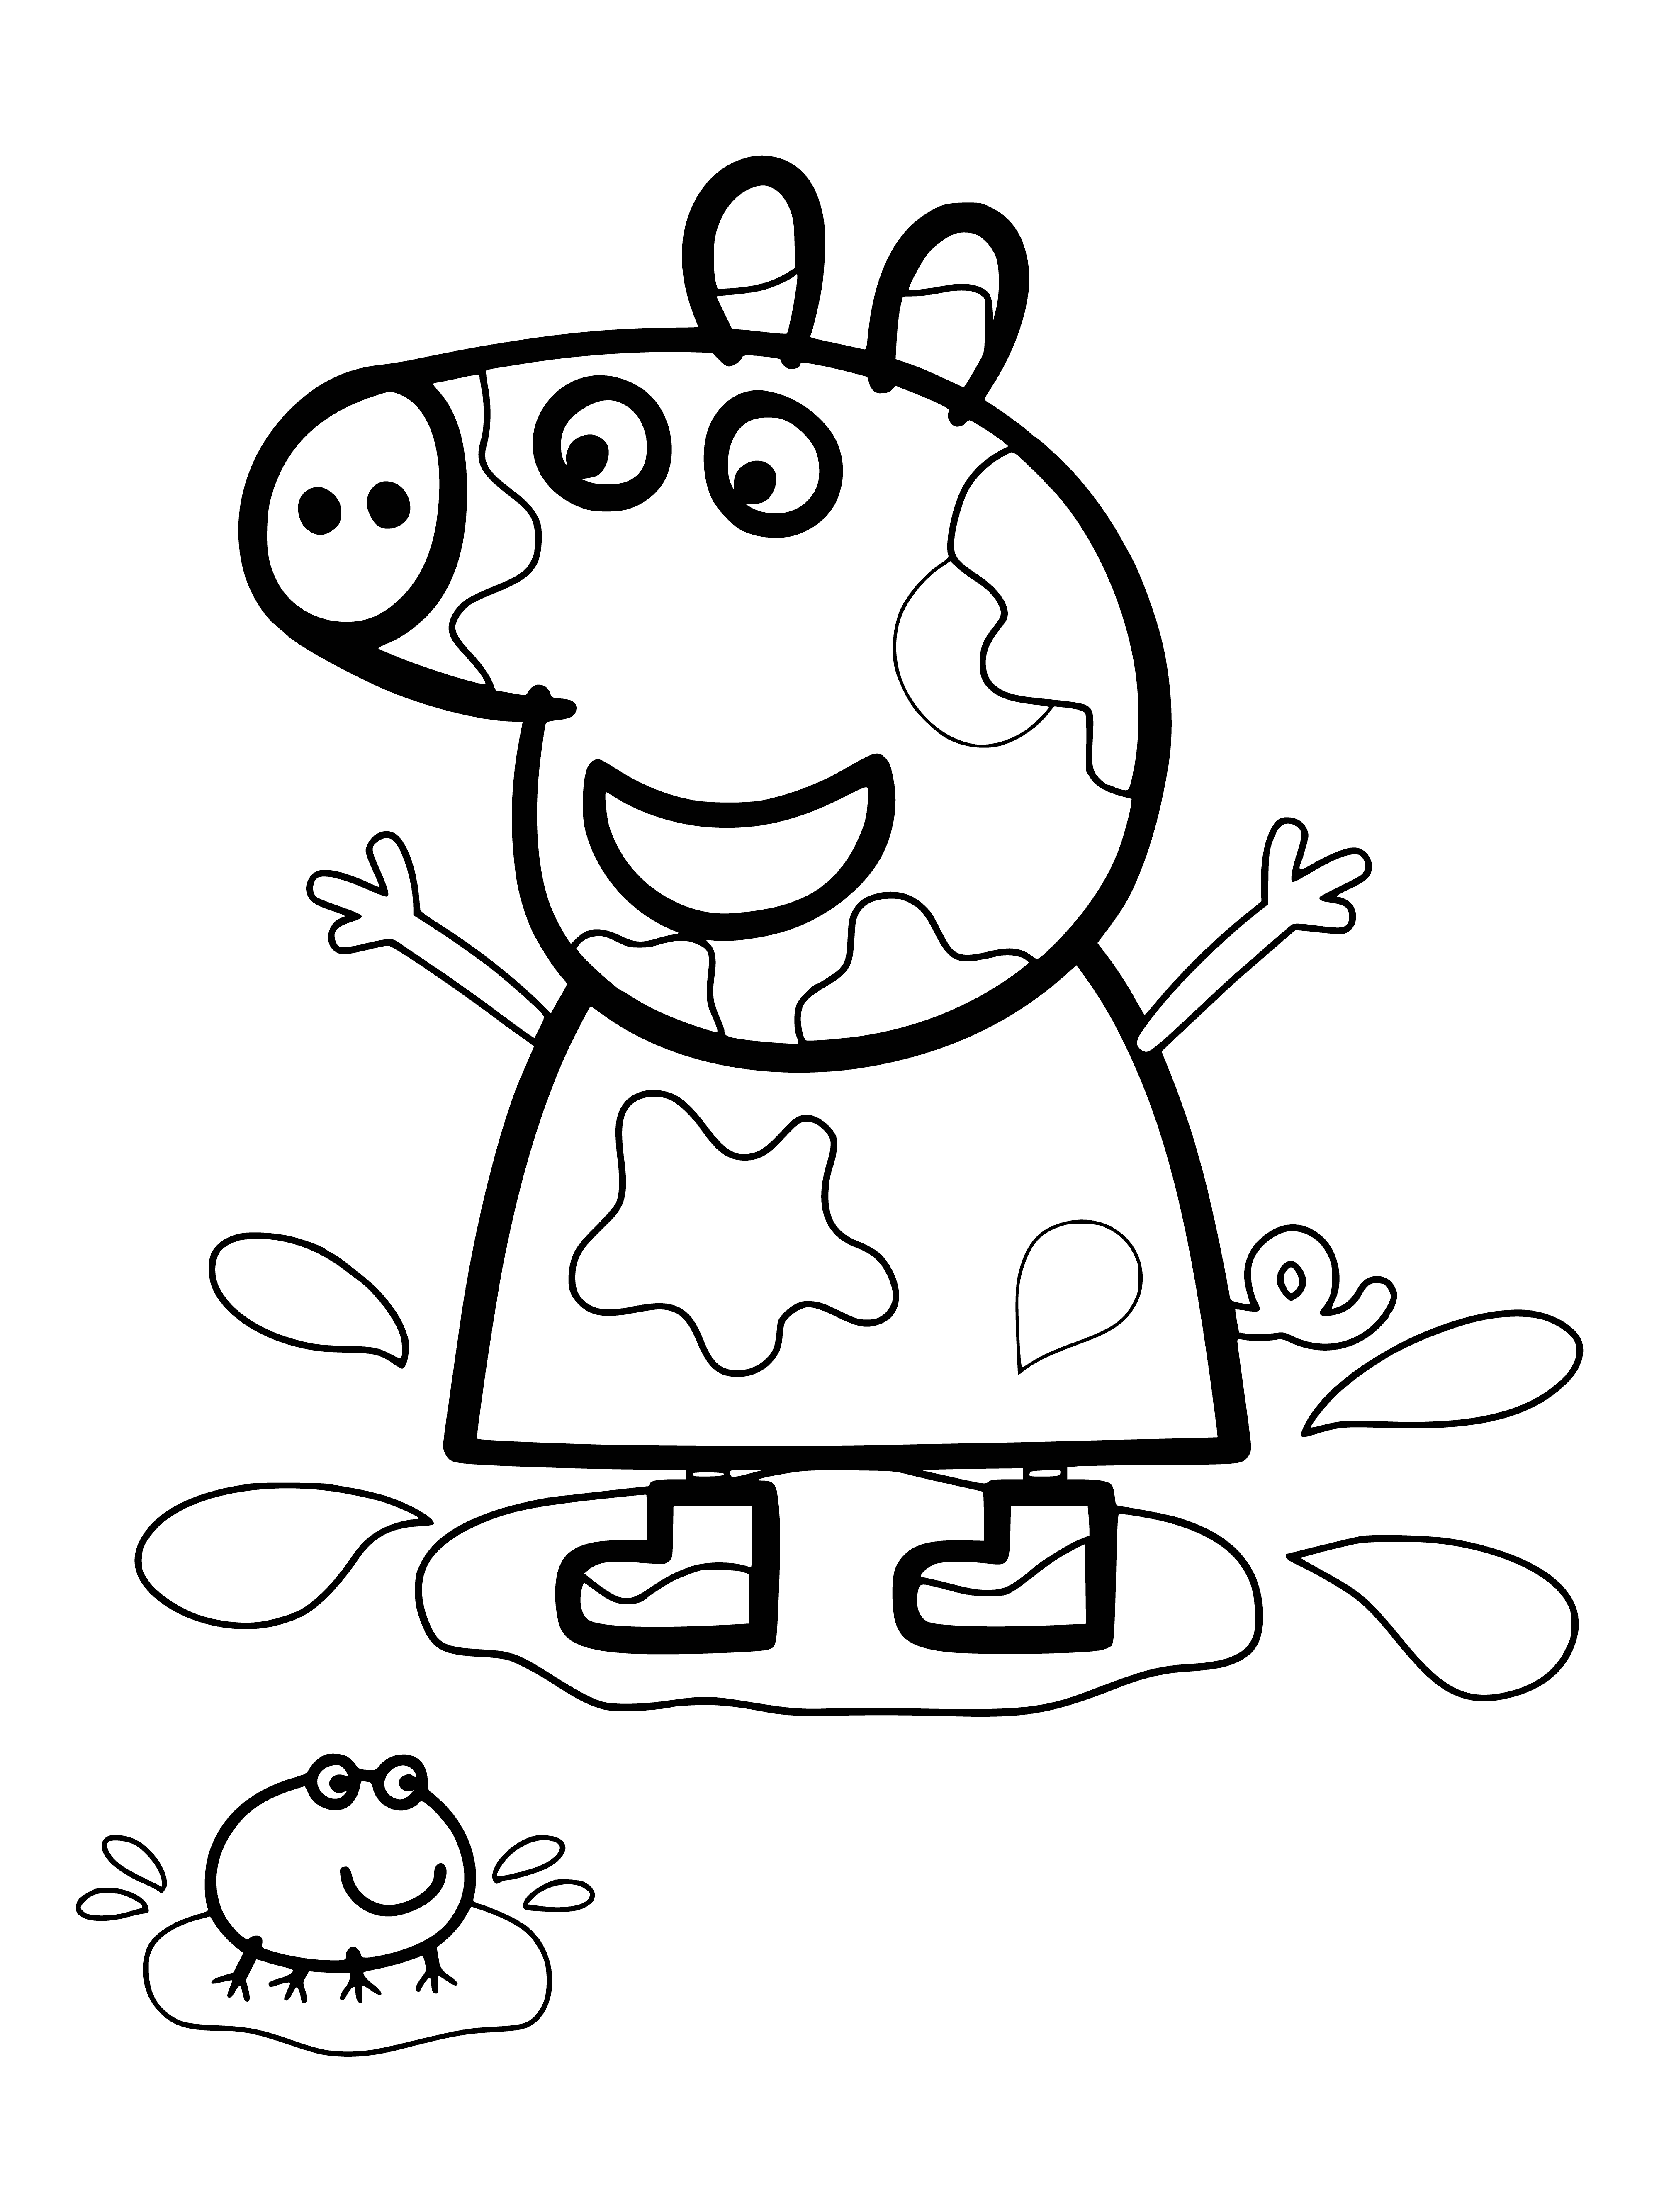 coloring page: Pink pig admires herself in puddle wearing green dress with yellow flowers.